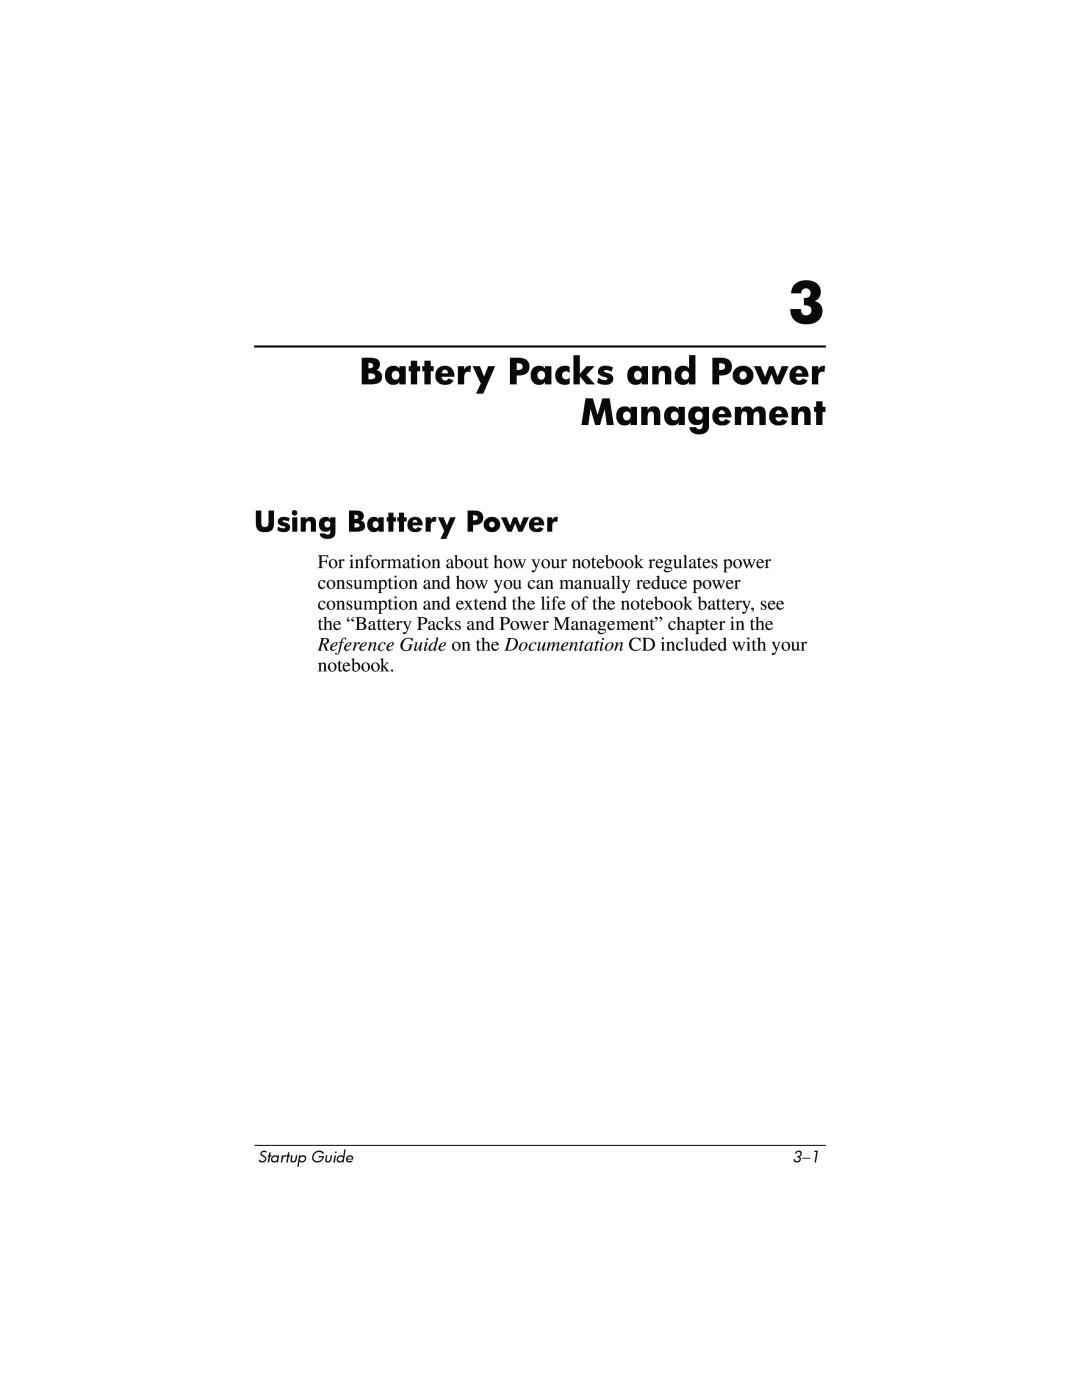 Compaq Personal Computer manual Battery Packs and Power Management, Using Battery Power, Startup Guide 